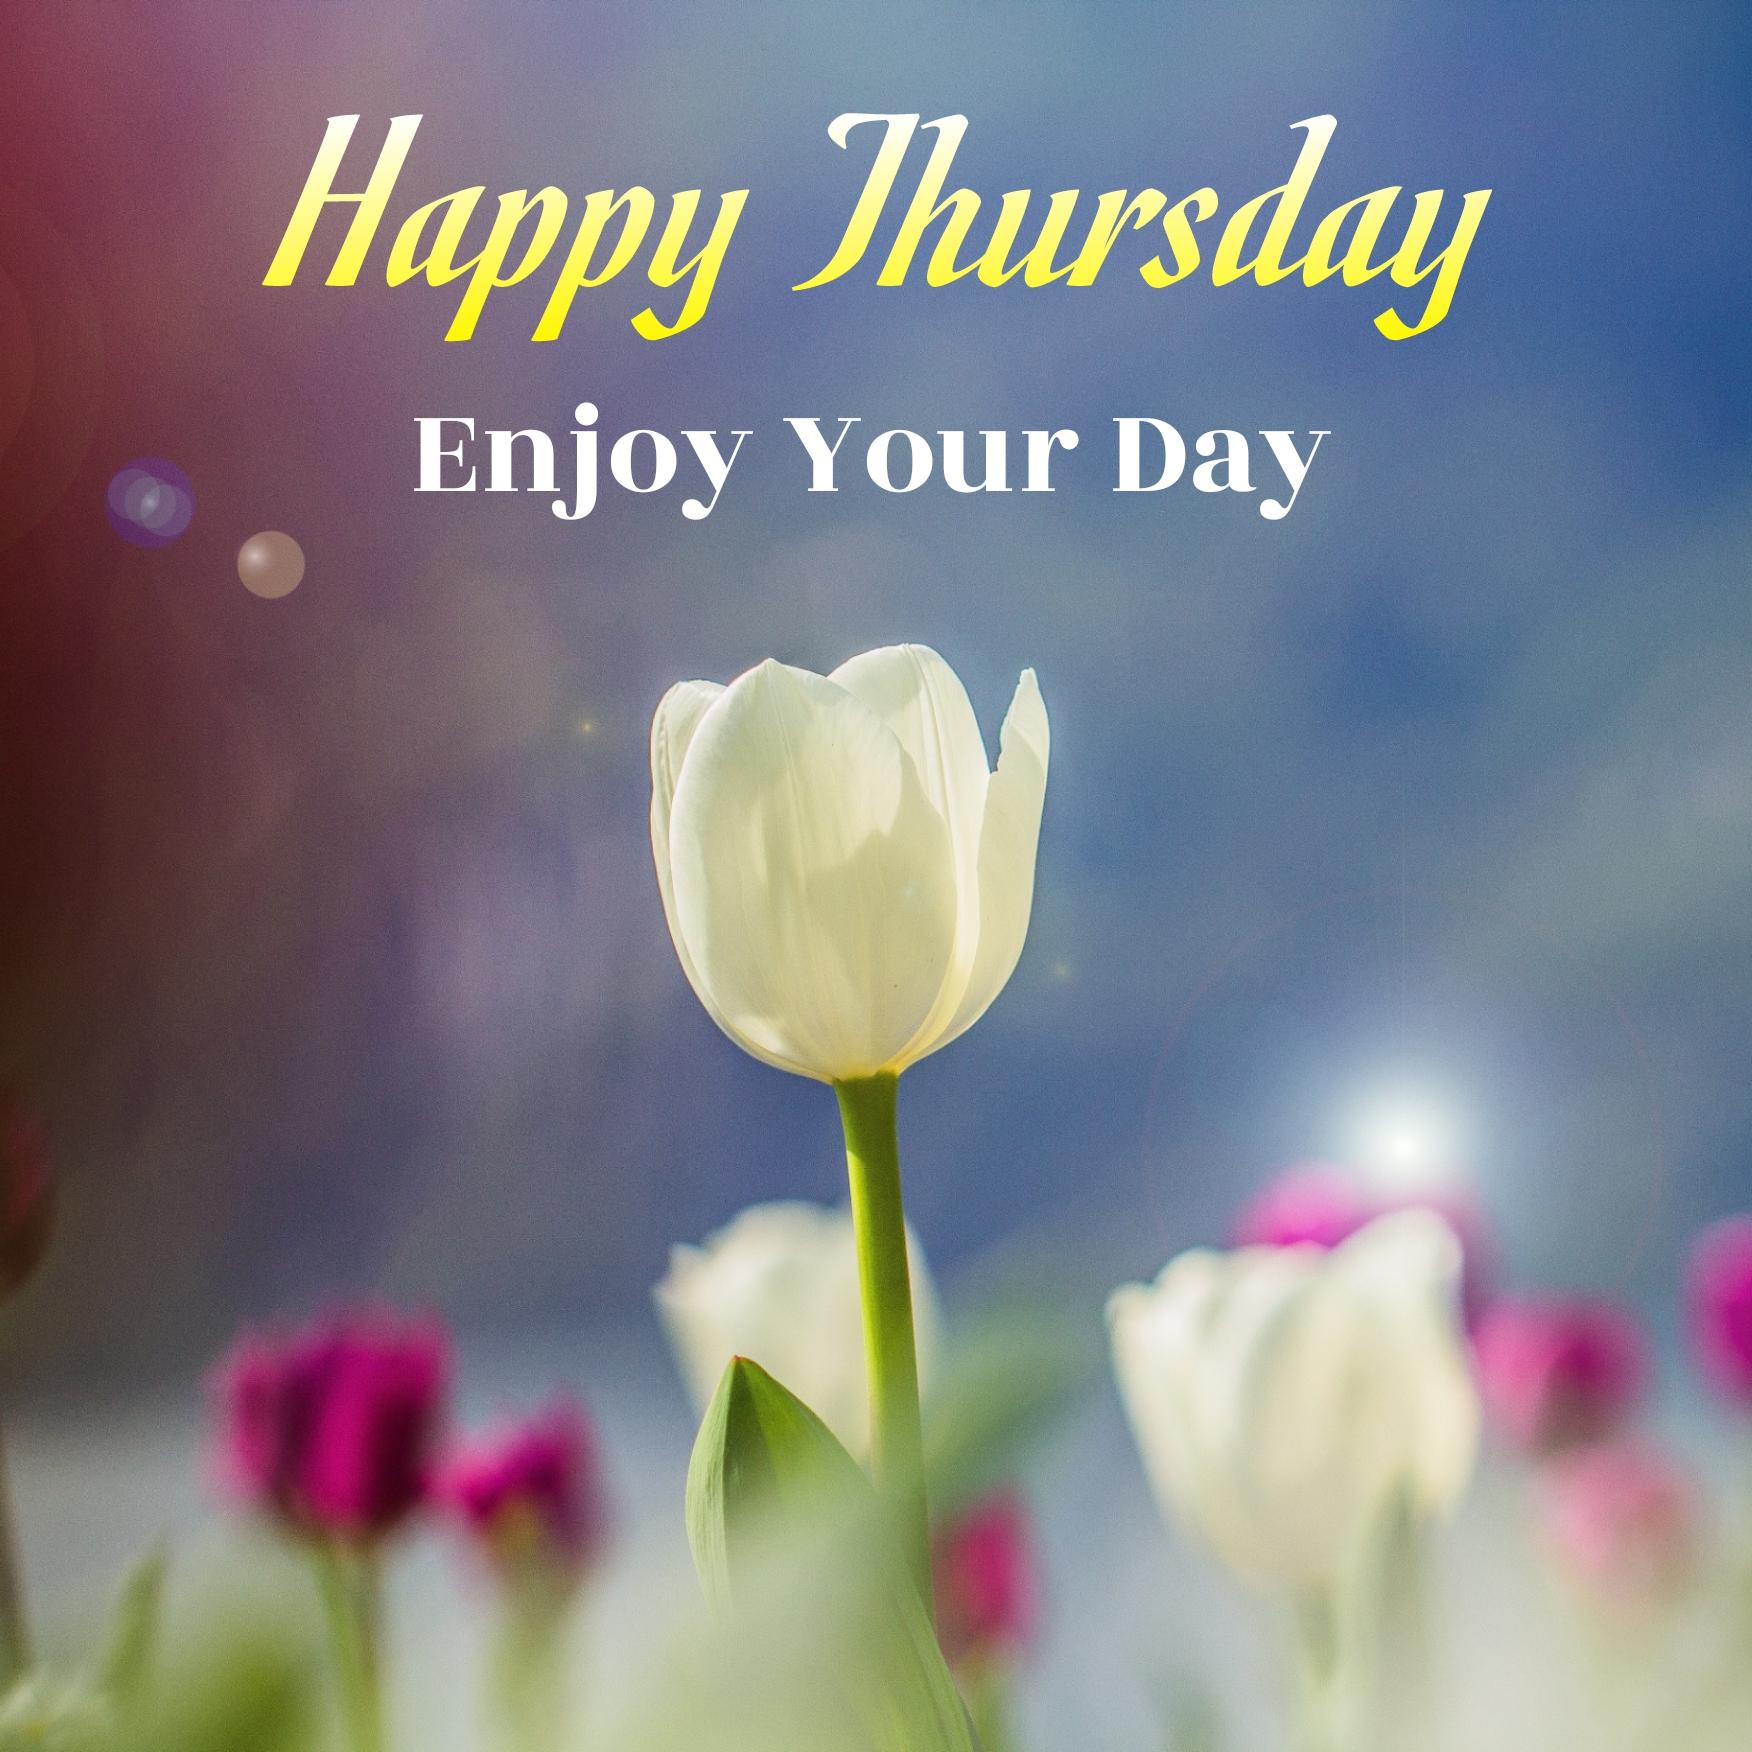 Happy Thursday Enjoy Your Day Images